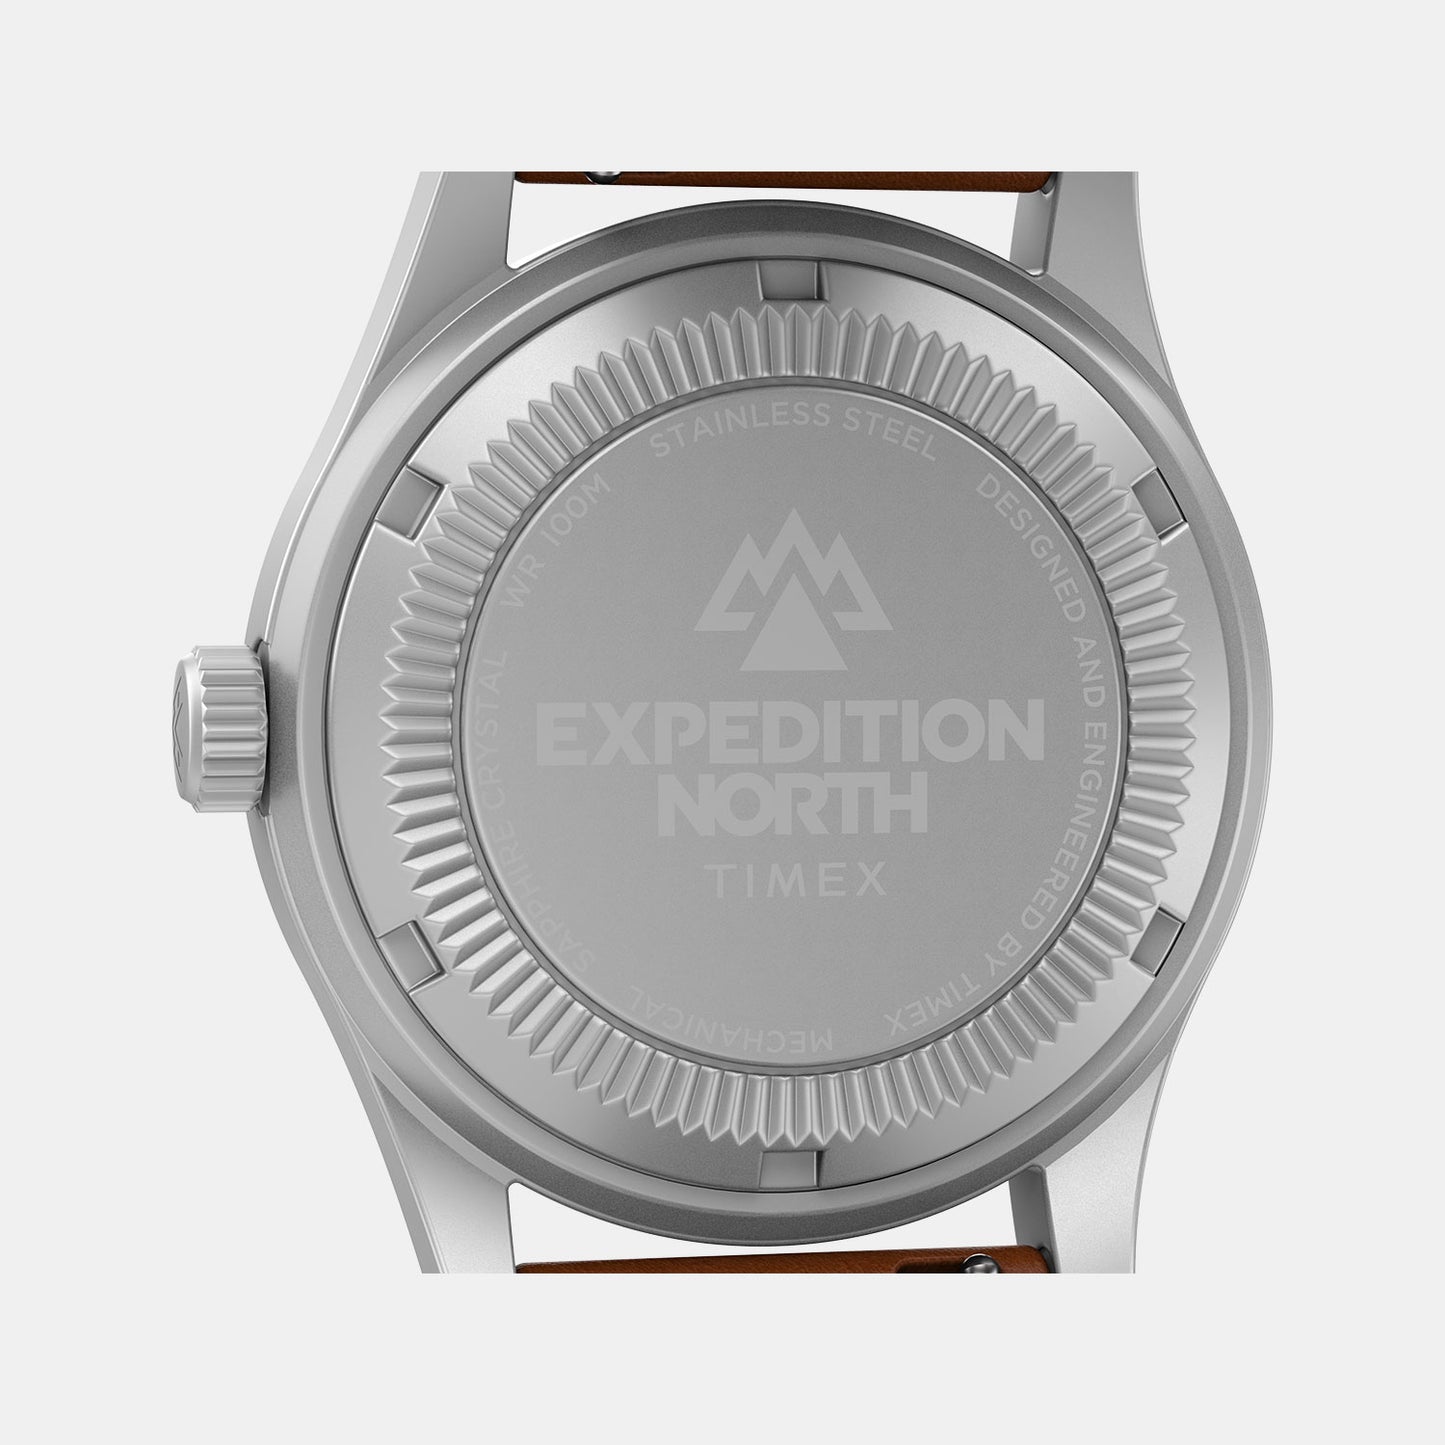 Expedition North Male Blue Analog Stainless Steel Watch TW2V00700X6